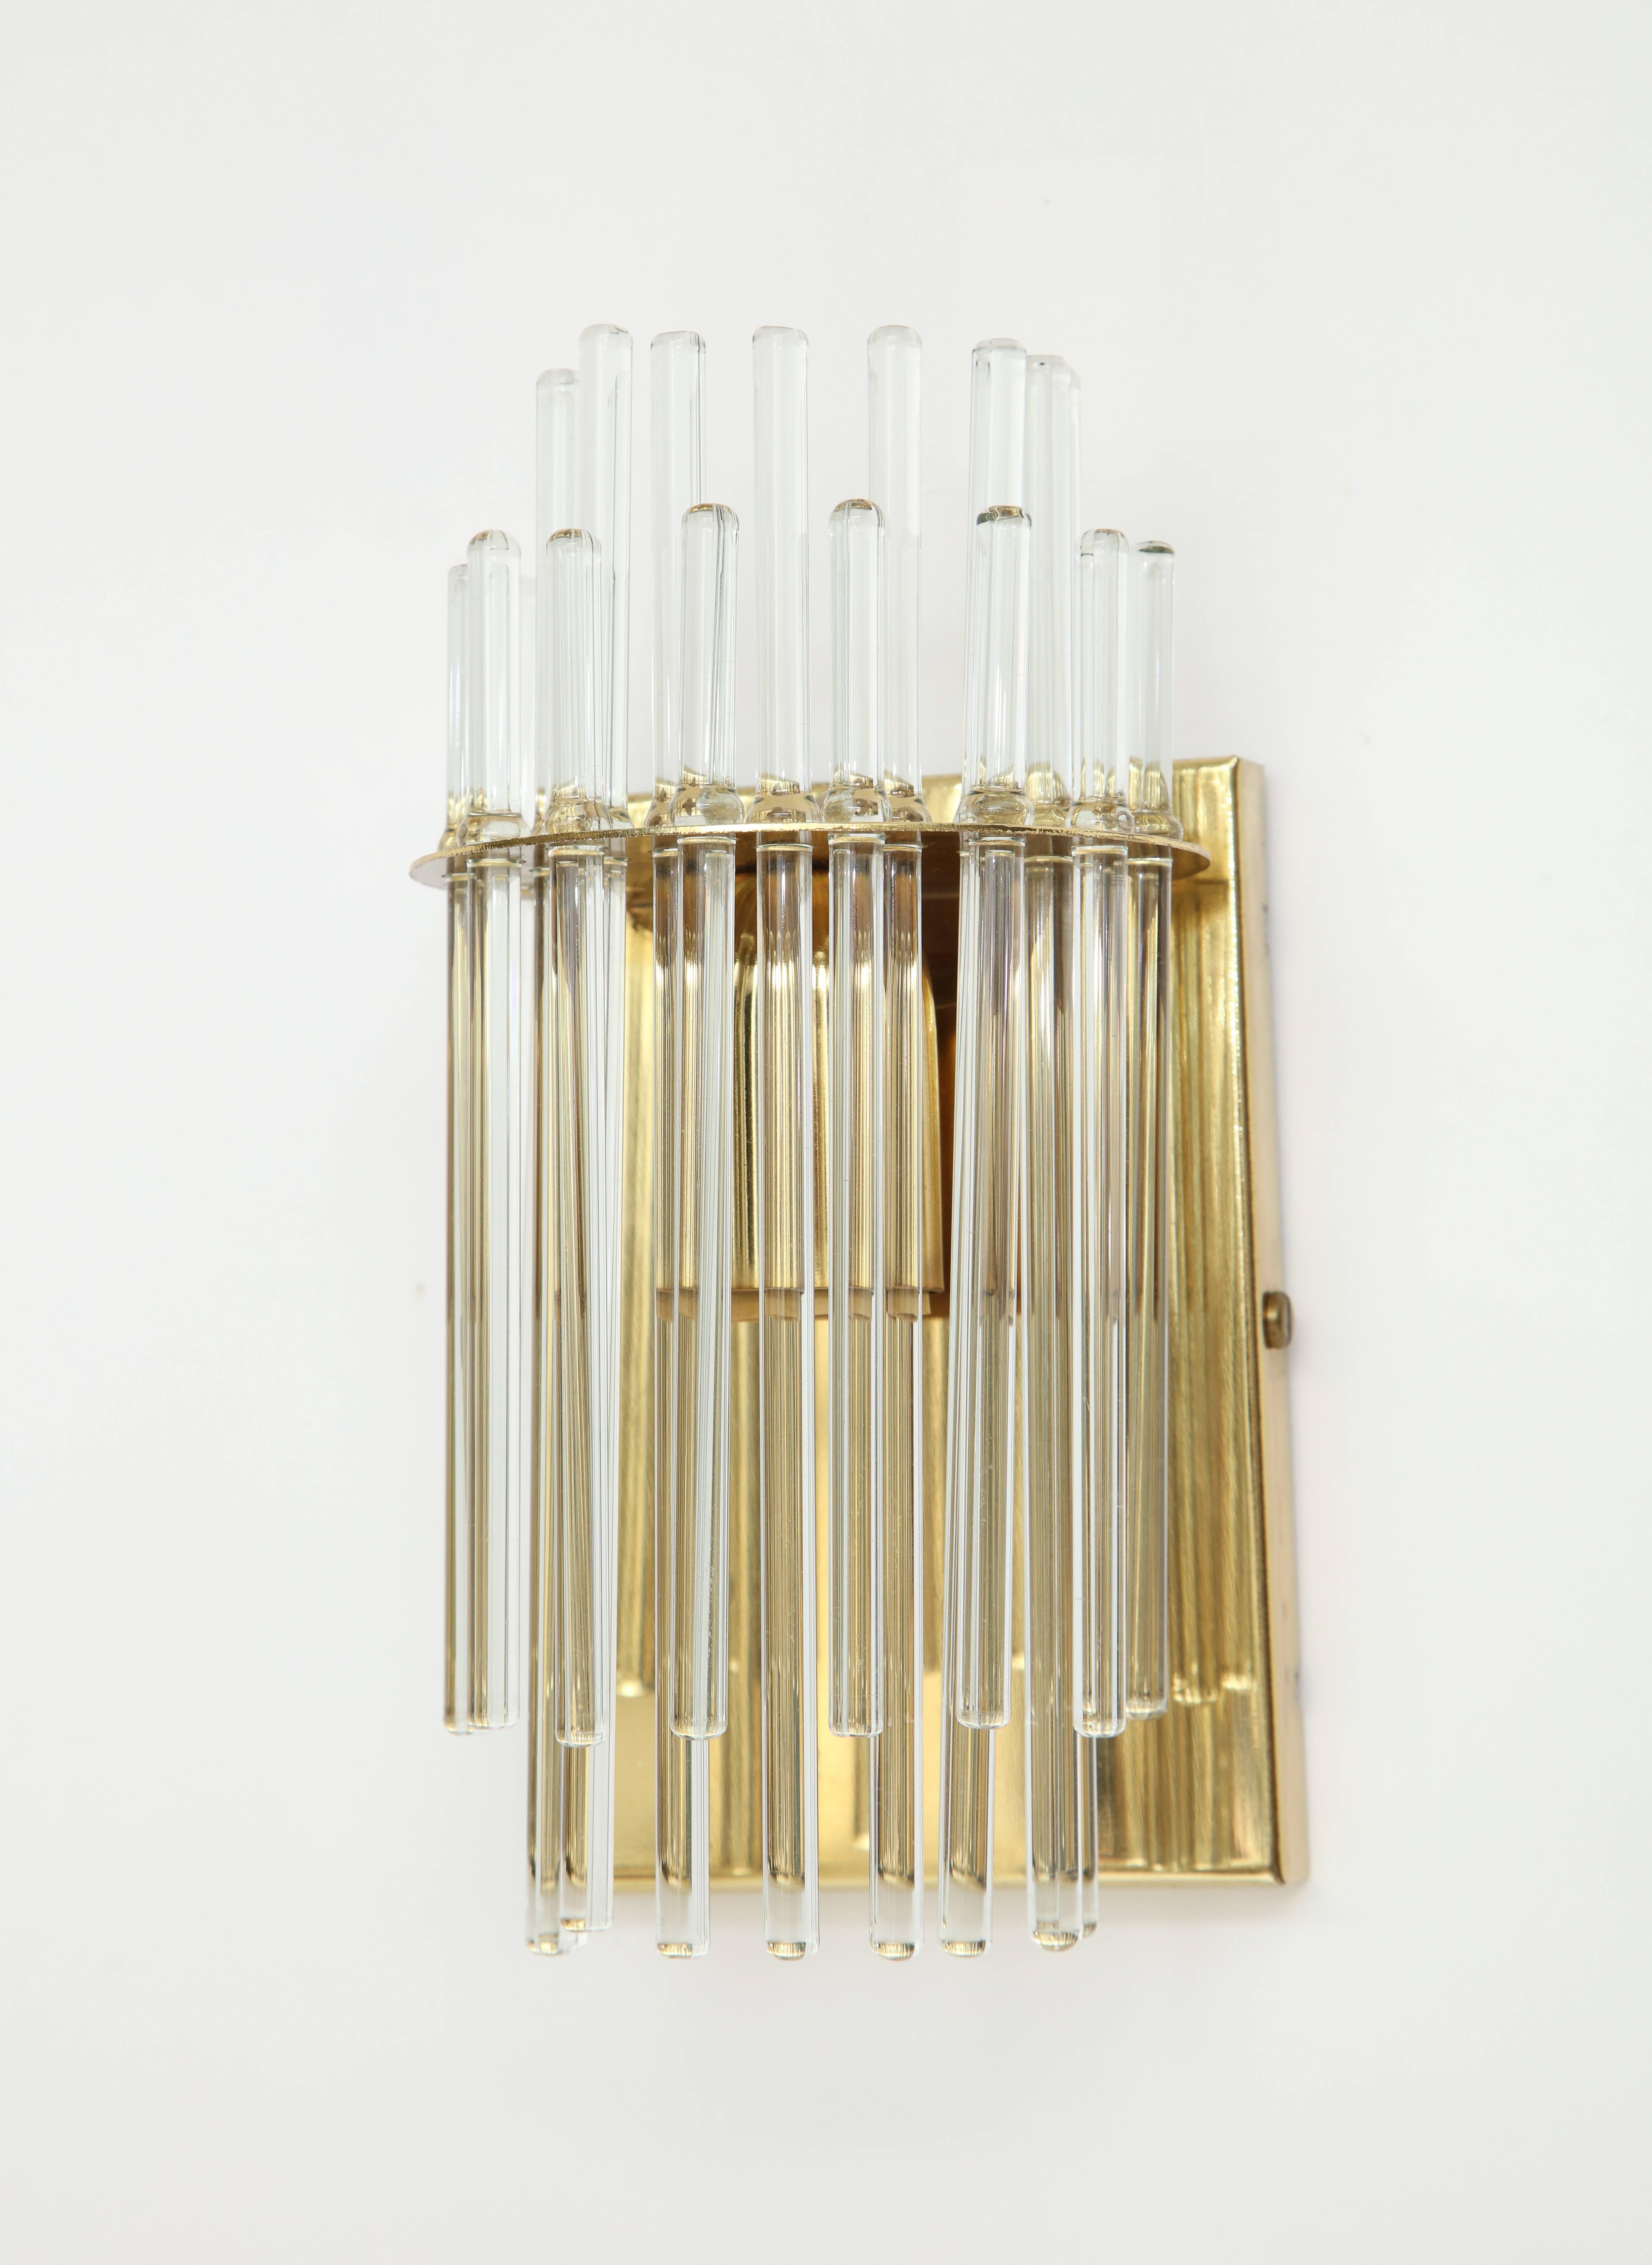 Sciolari glass rod brass Italian sconces, Mid-Century, 1960s

Beautiful glass rod sconces with brass backing. In lovely original condition.